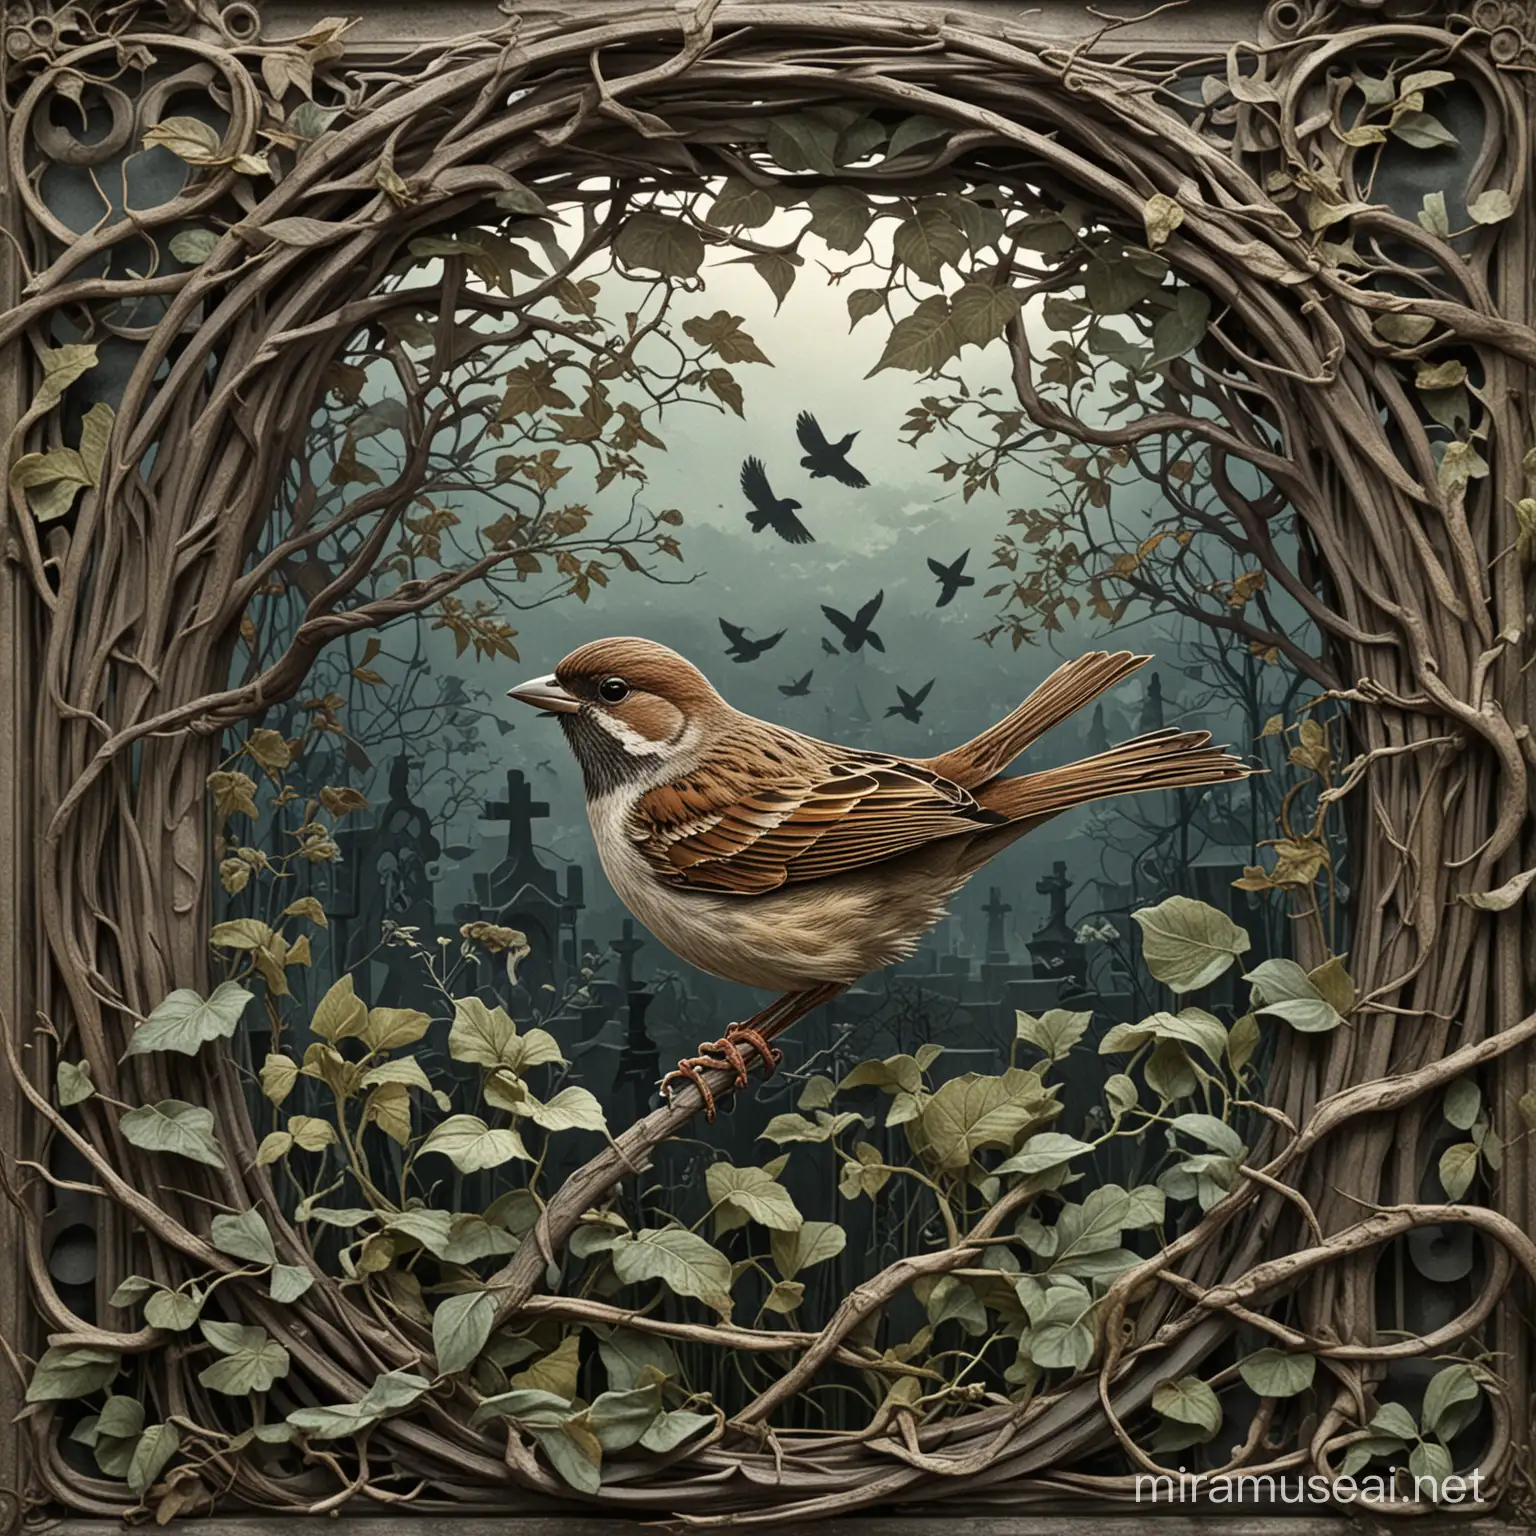 Art Nouveau Sparrow in Shadowy Graveyard with Vines